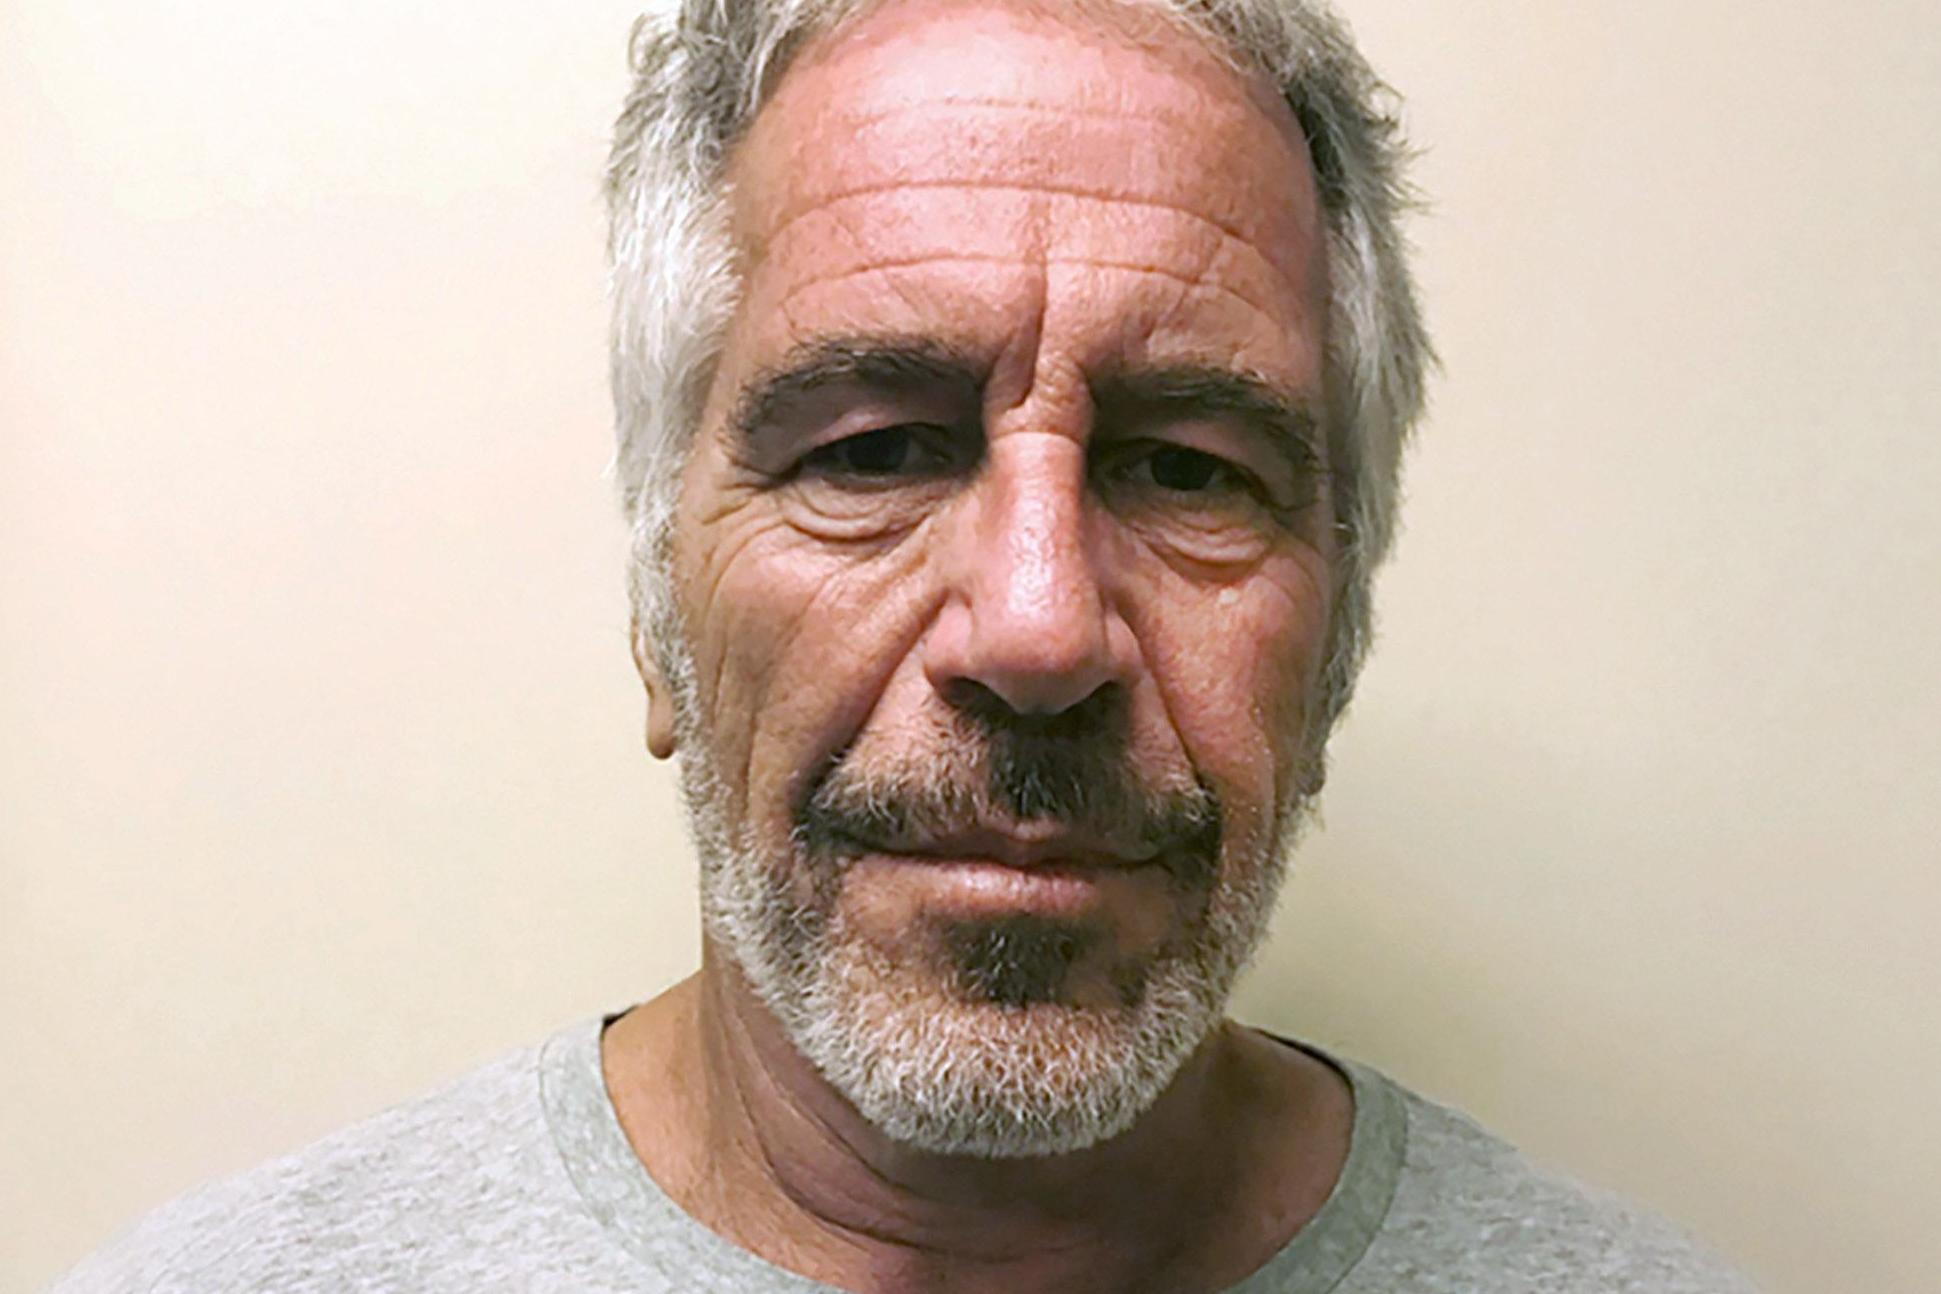 From Ghislaine Maxwell's 'veneer of respectability' to a 'creepy' birthday song: Most startling moments in Lifetime's Surviving Jeffrey Epstein documentary